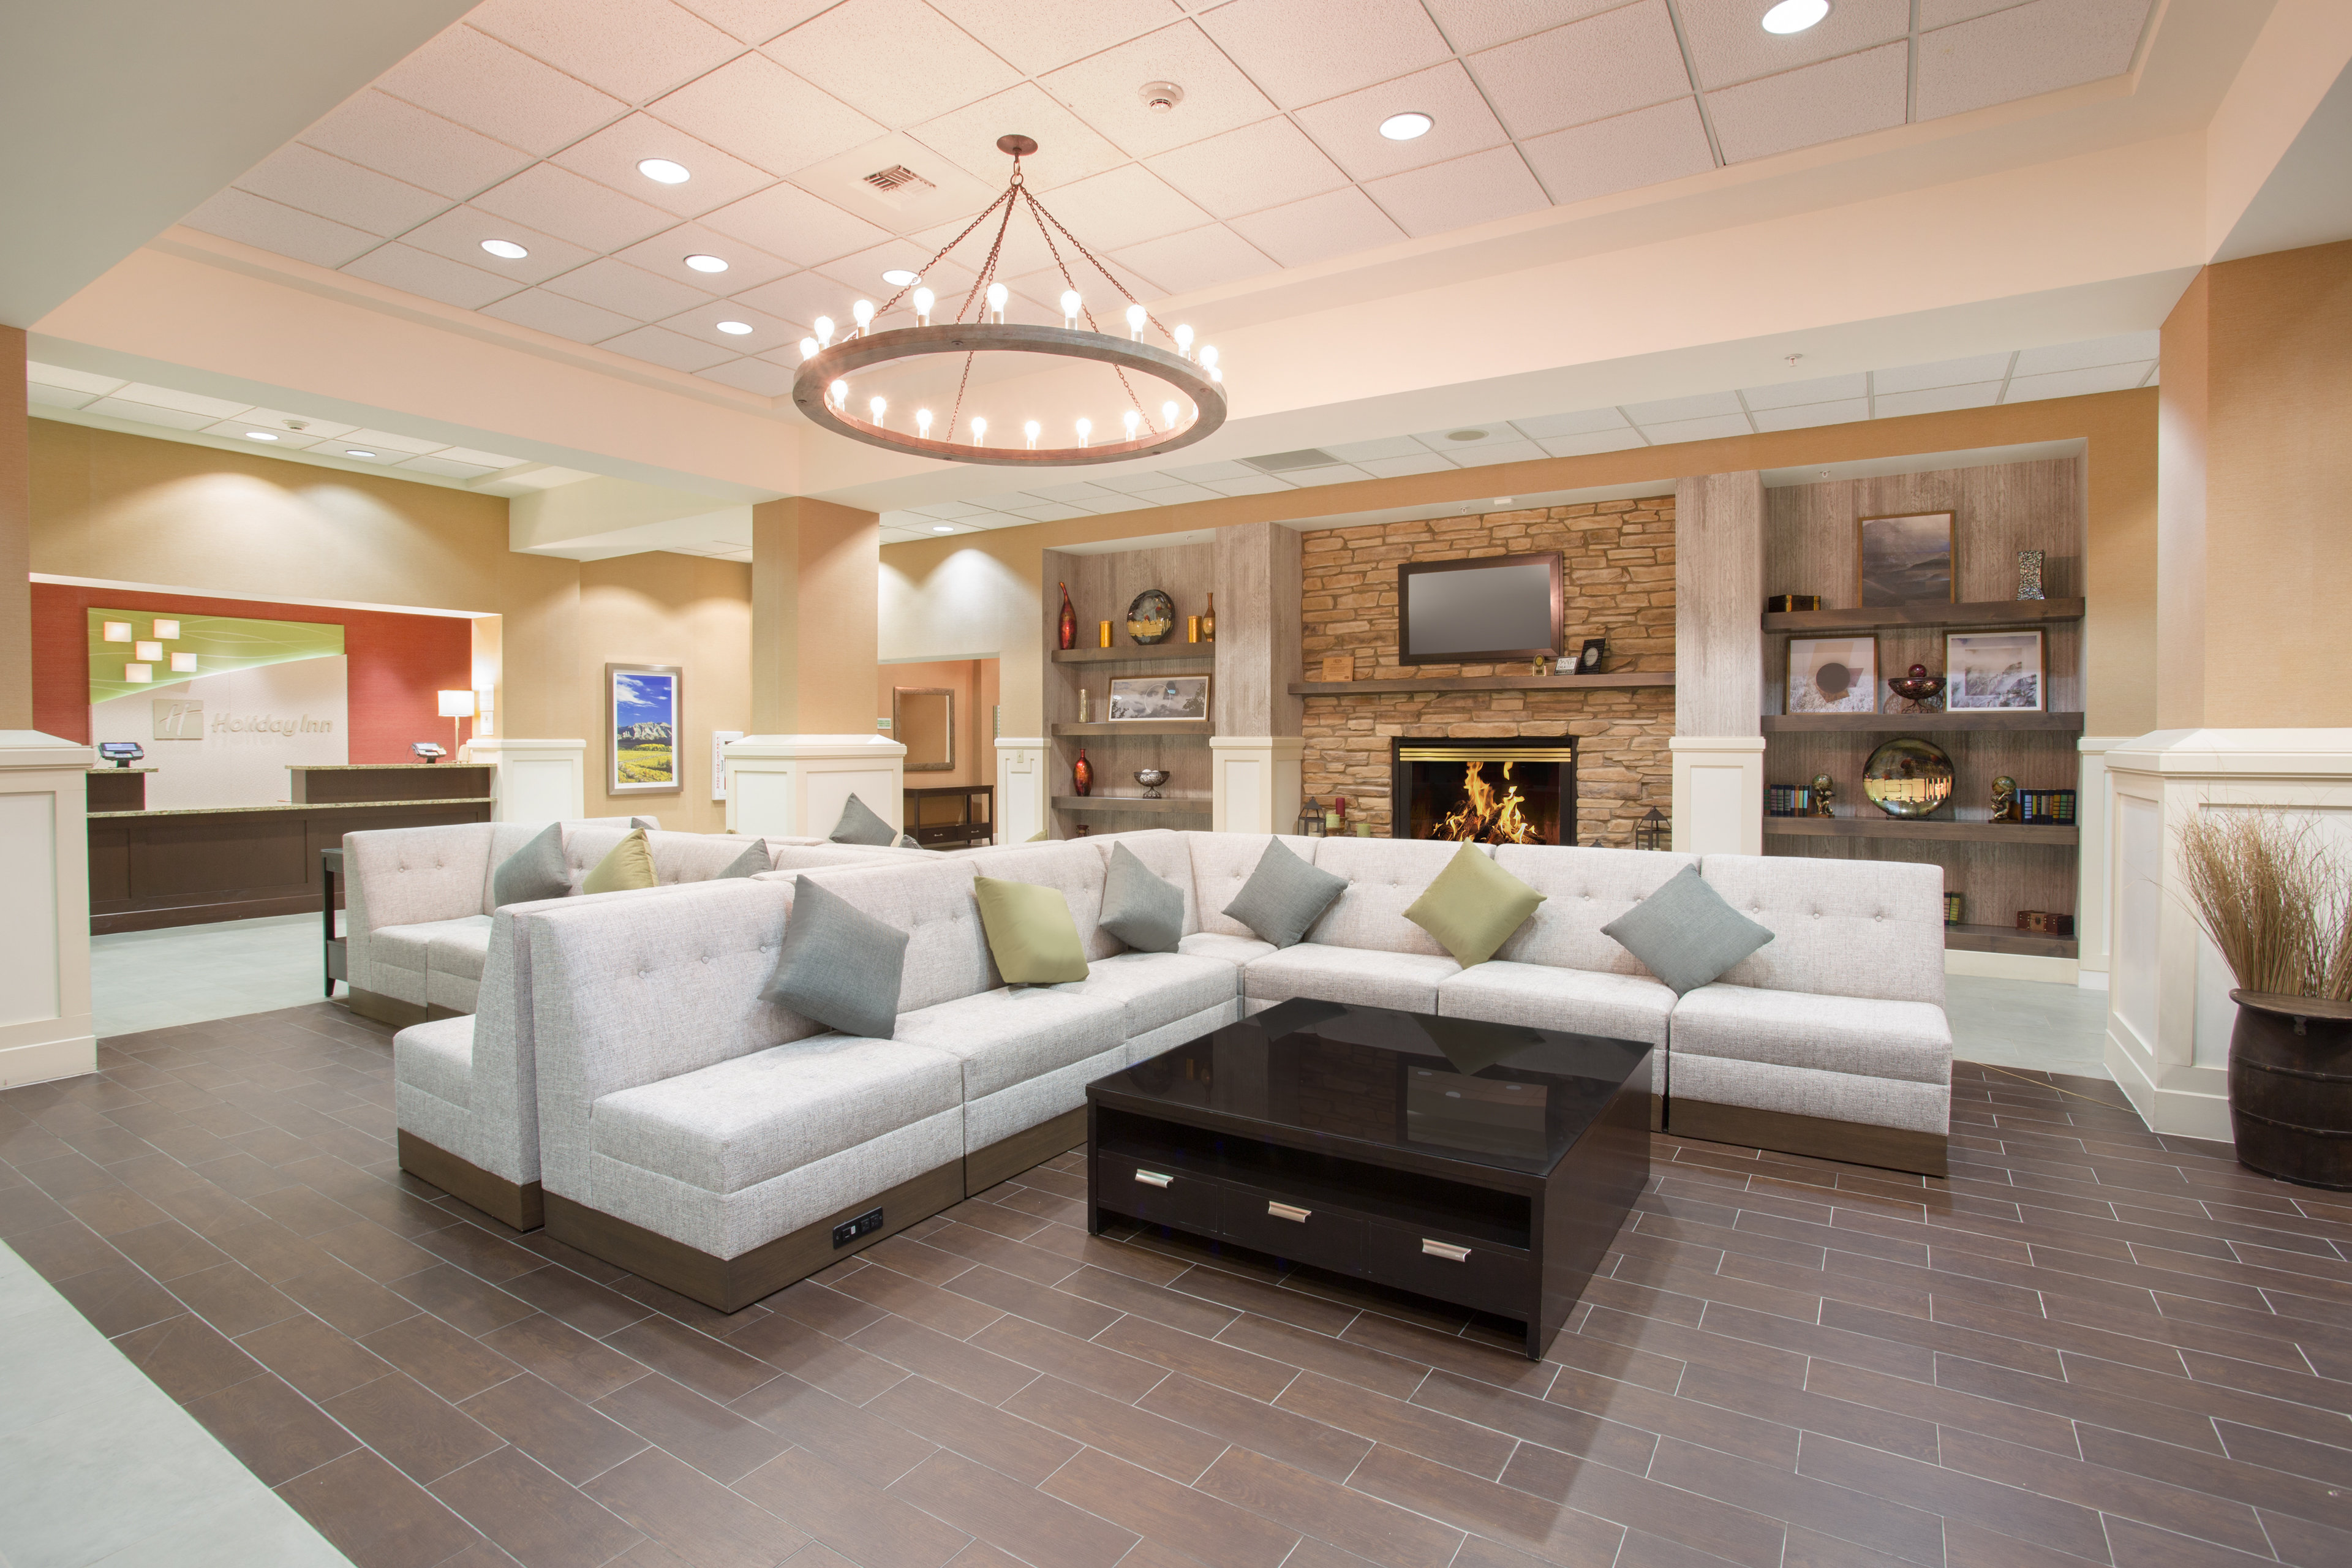 Colorado Springs Airport - Relax in our newly renovated lobby